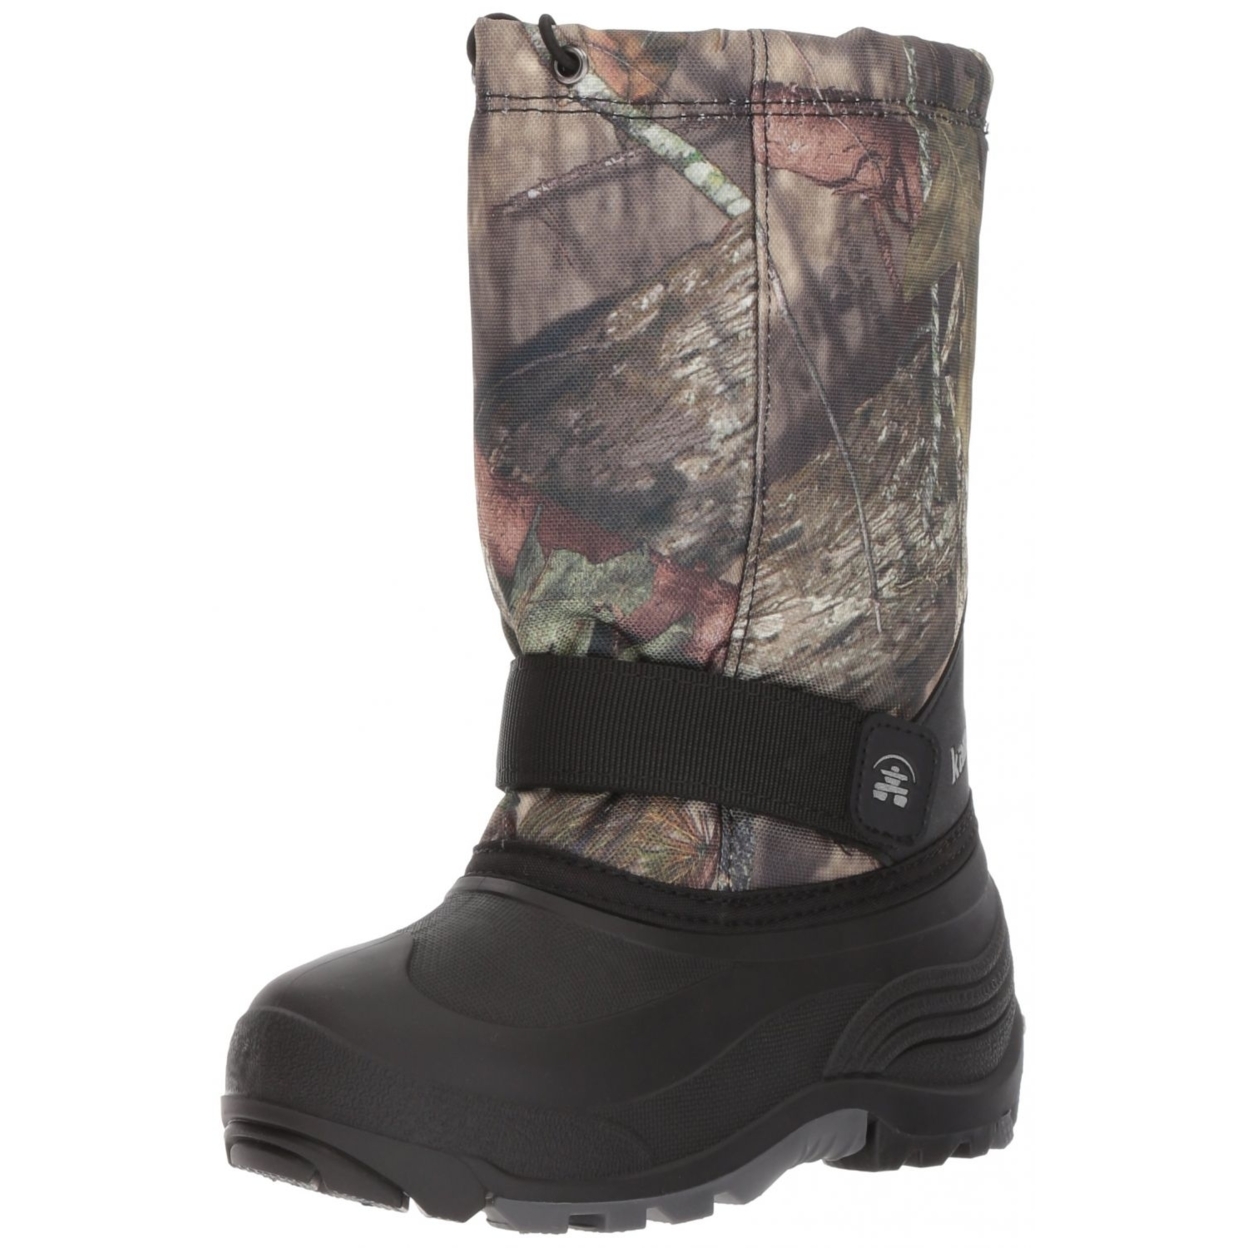 Kamik Rocket Cold Weather Boot (Toddler/Little Kid/Big Kid) 9 Toddler MOSSY OAK COUNTRY CAMO - MOSSY OAK COUNTRY CAMO, 6 Big Kid